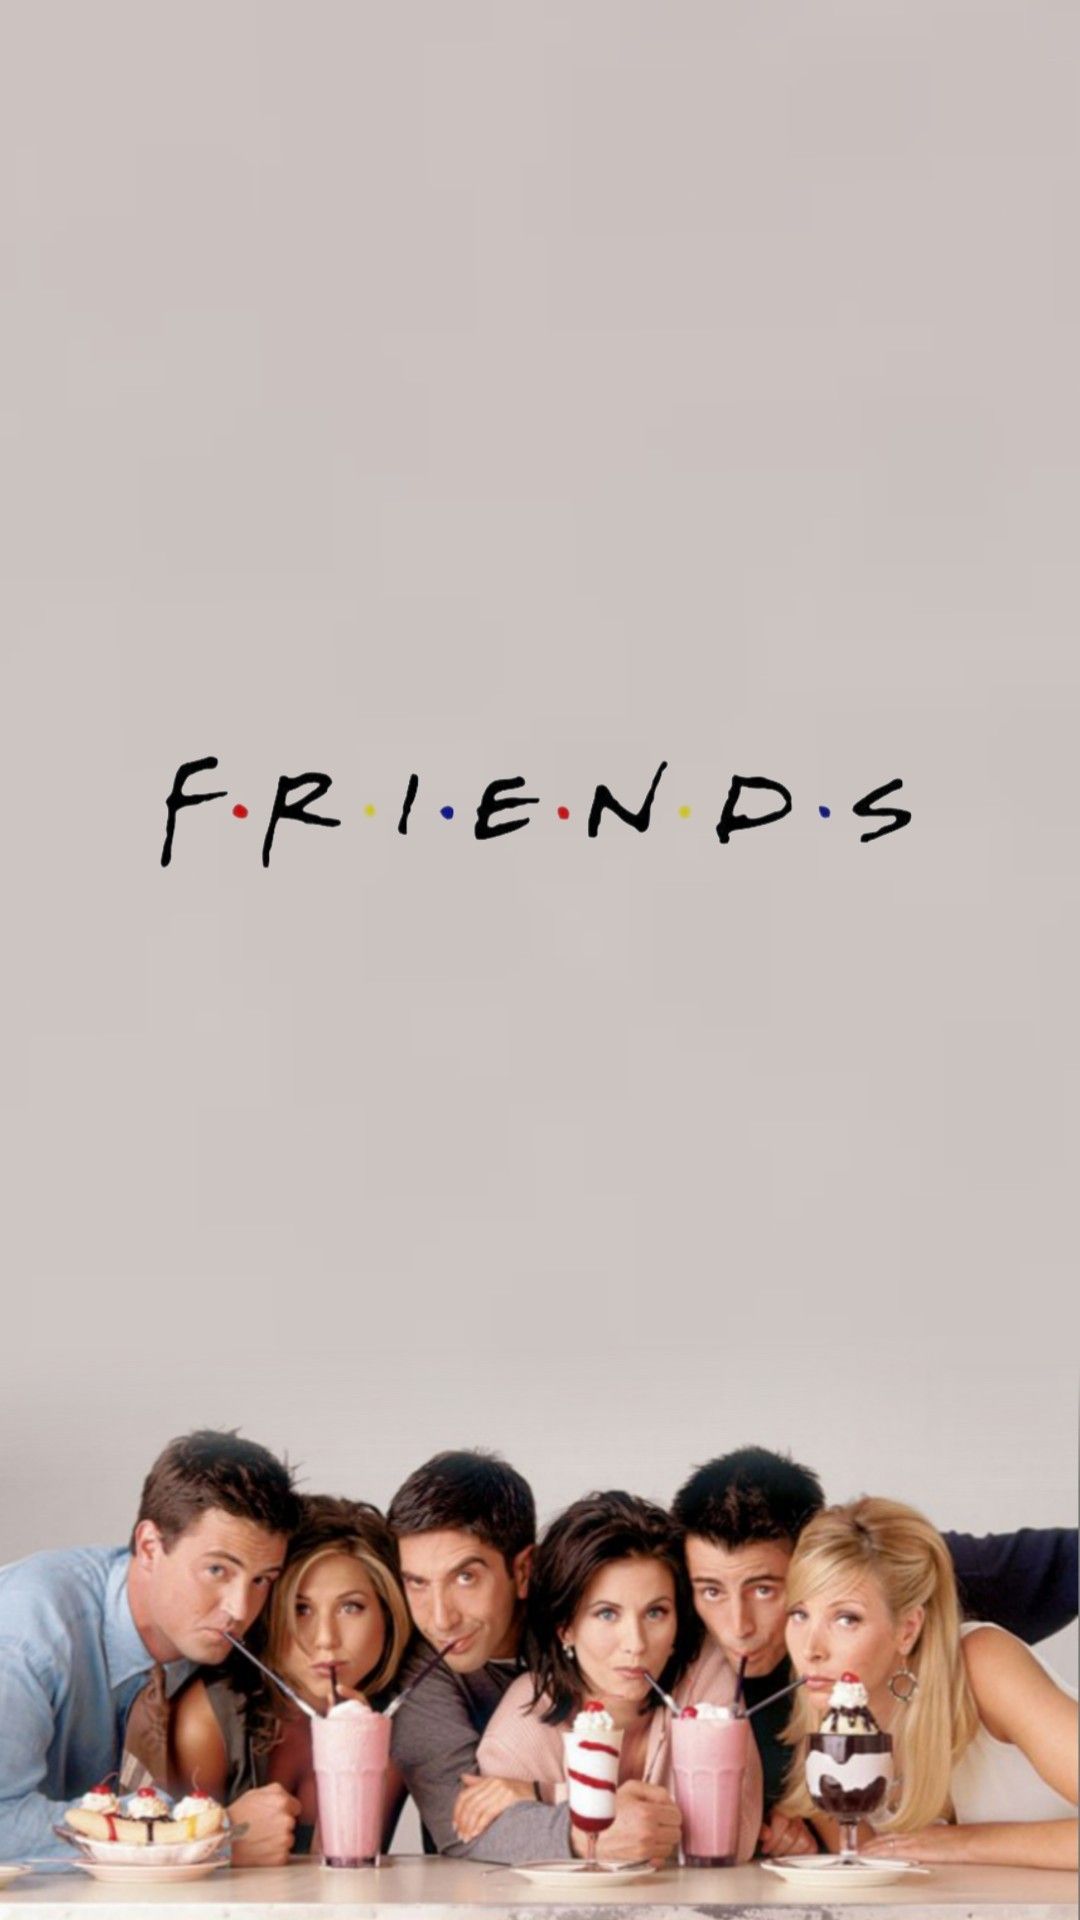 friends wallpaper iphone,people,facial expression,text,smile,font